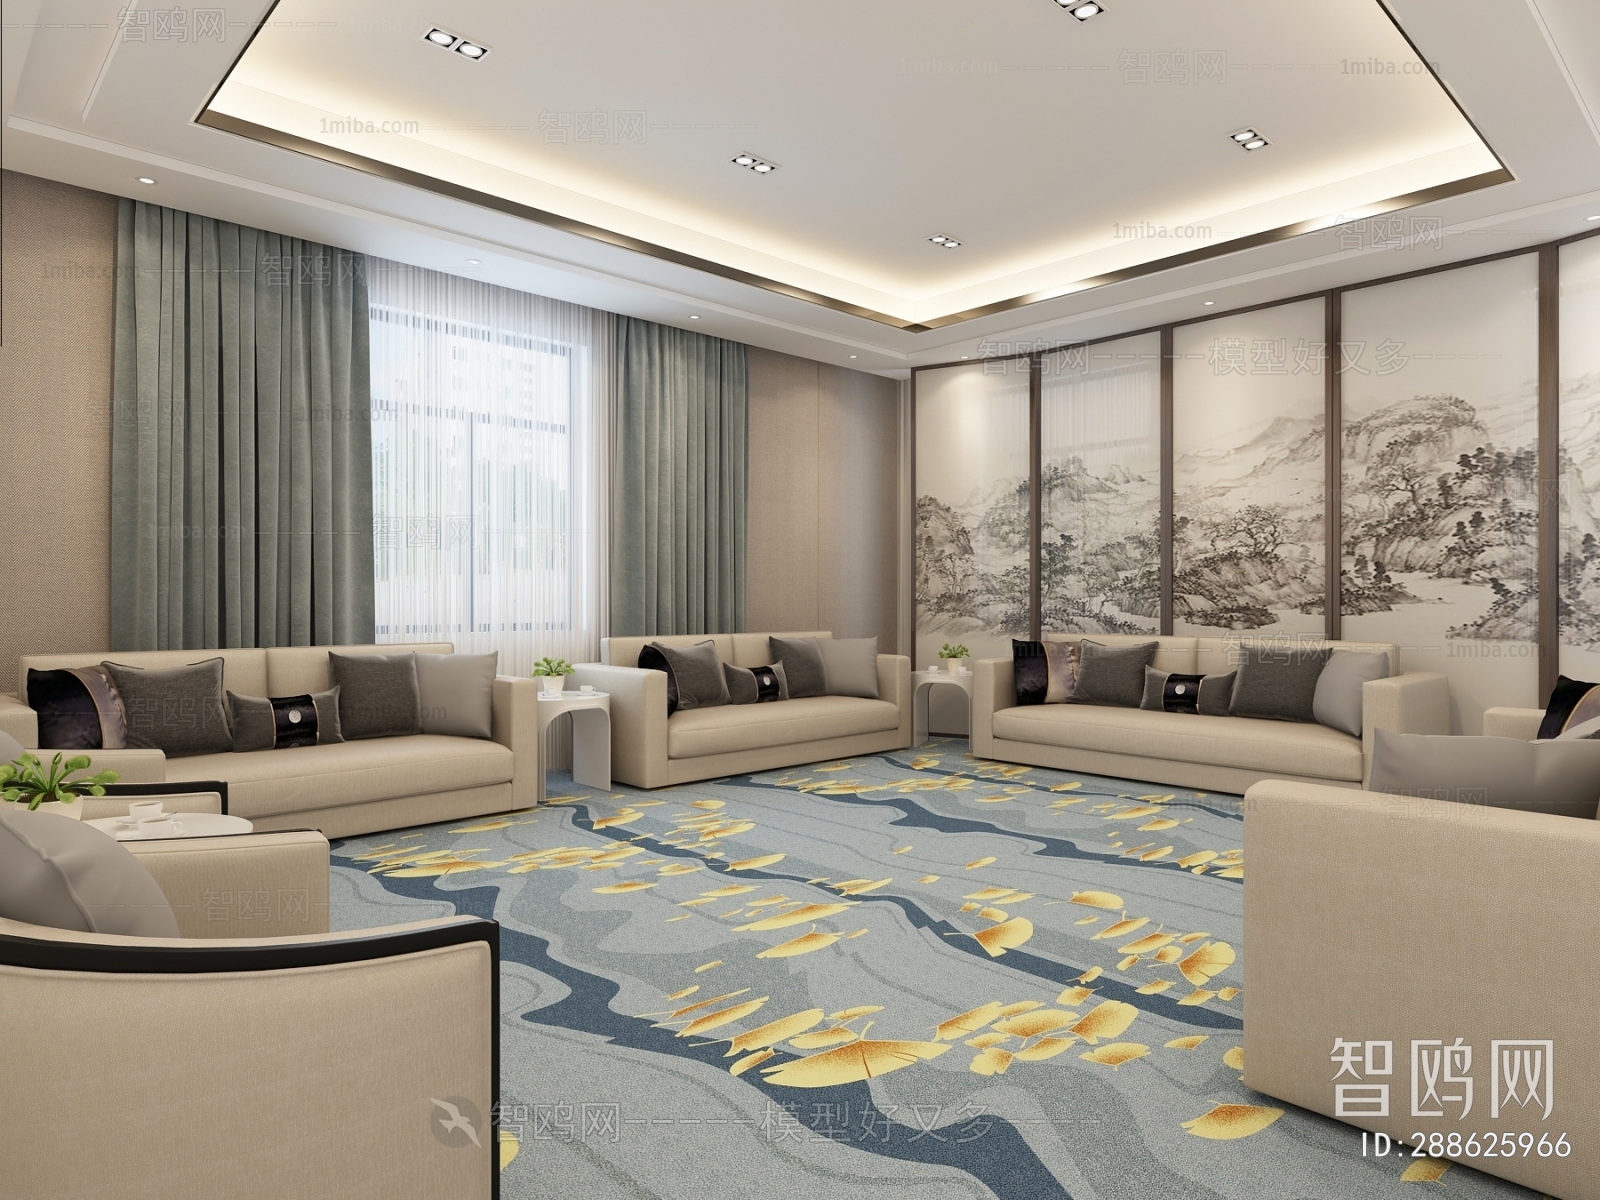 Modern New Chinese Style Reception Room